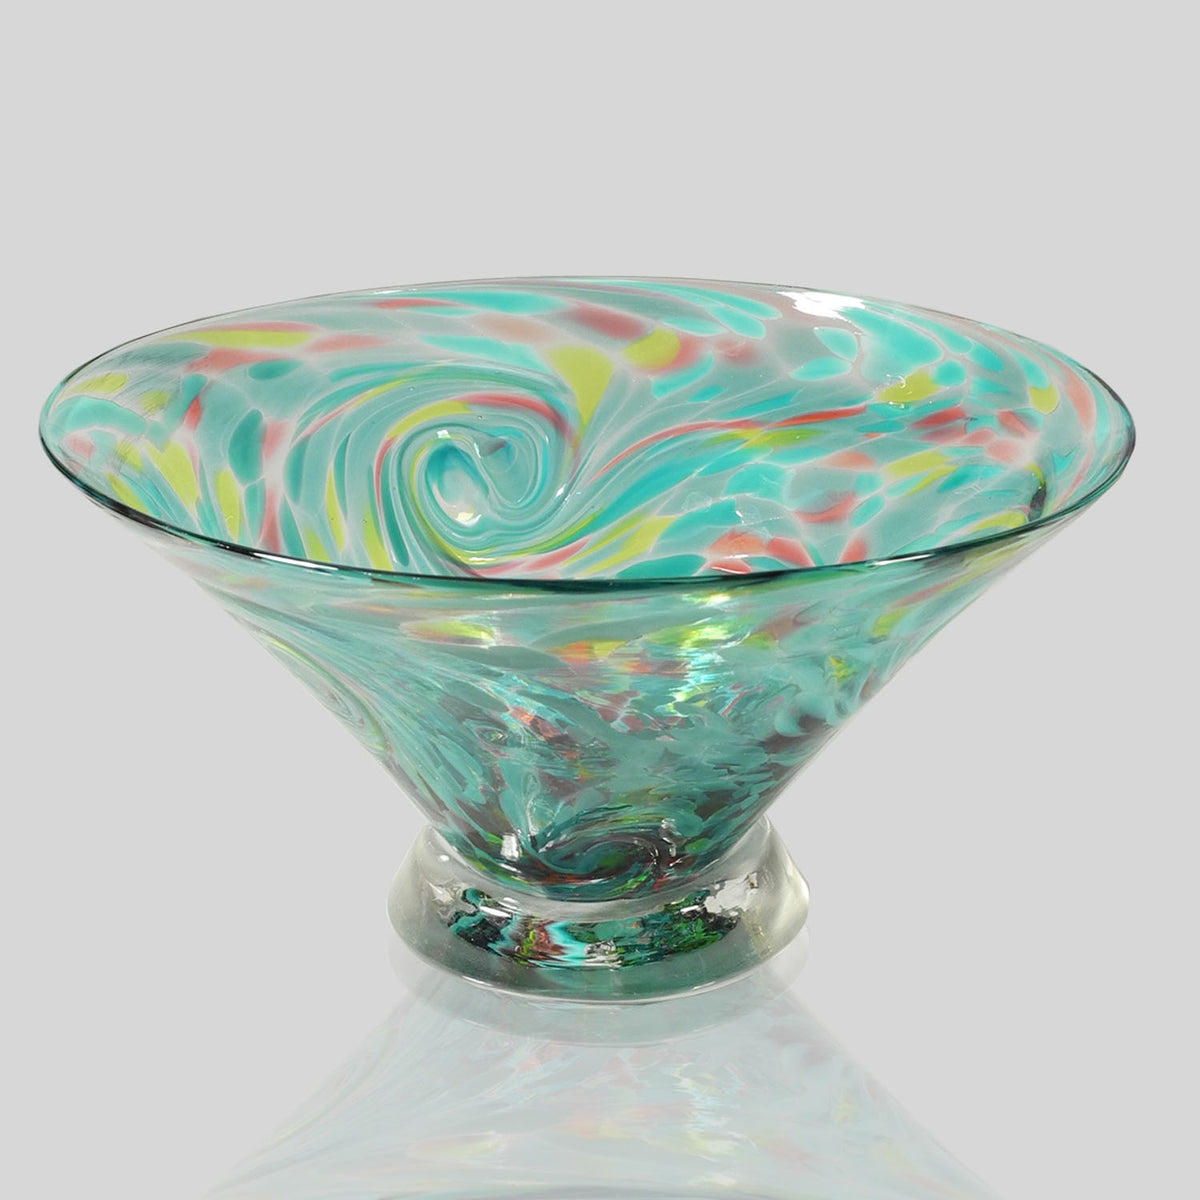 Alexi Hunter & Mariel Waddell - Small Starry Bowl Teal